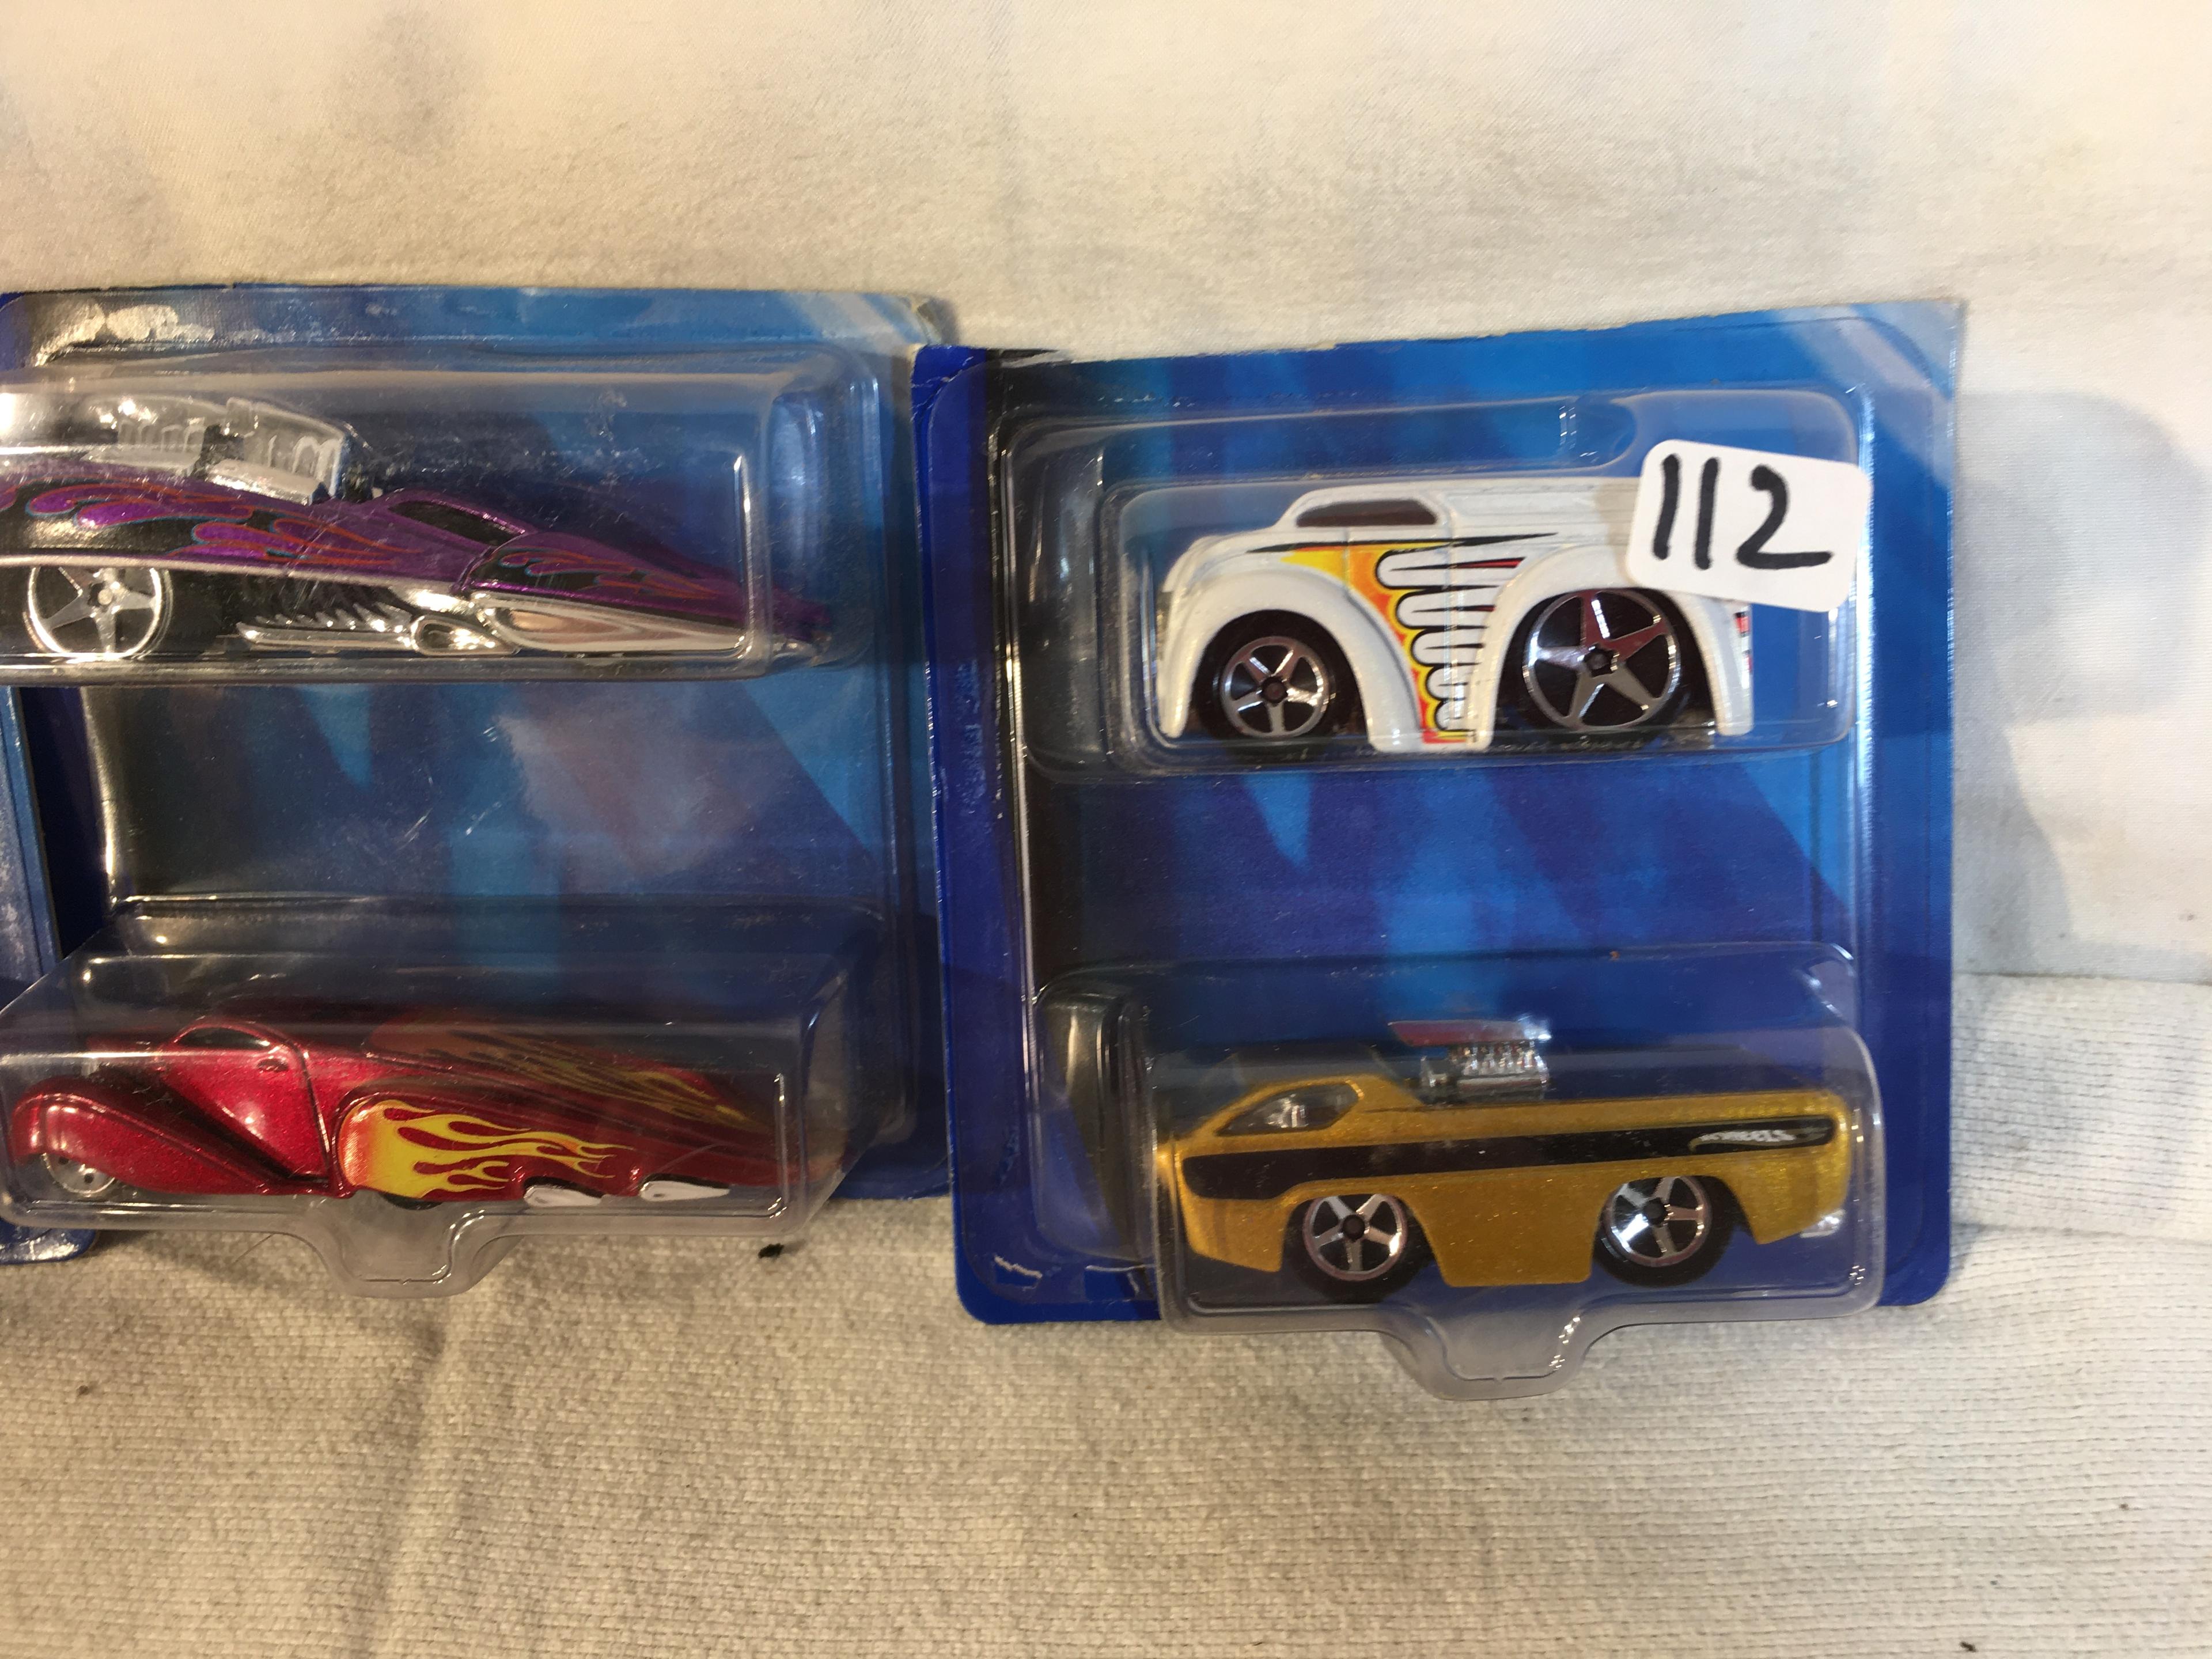 Lot of 3 Pcs CollectorOf 2 pack Cars  New in Package Hot wheels Mattel 1/64 DieCast Meta Cars